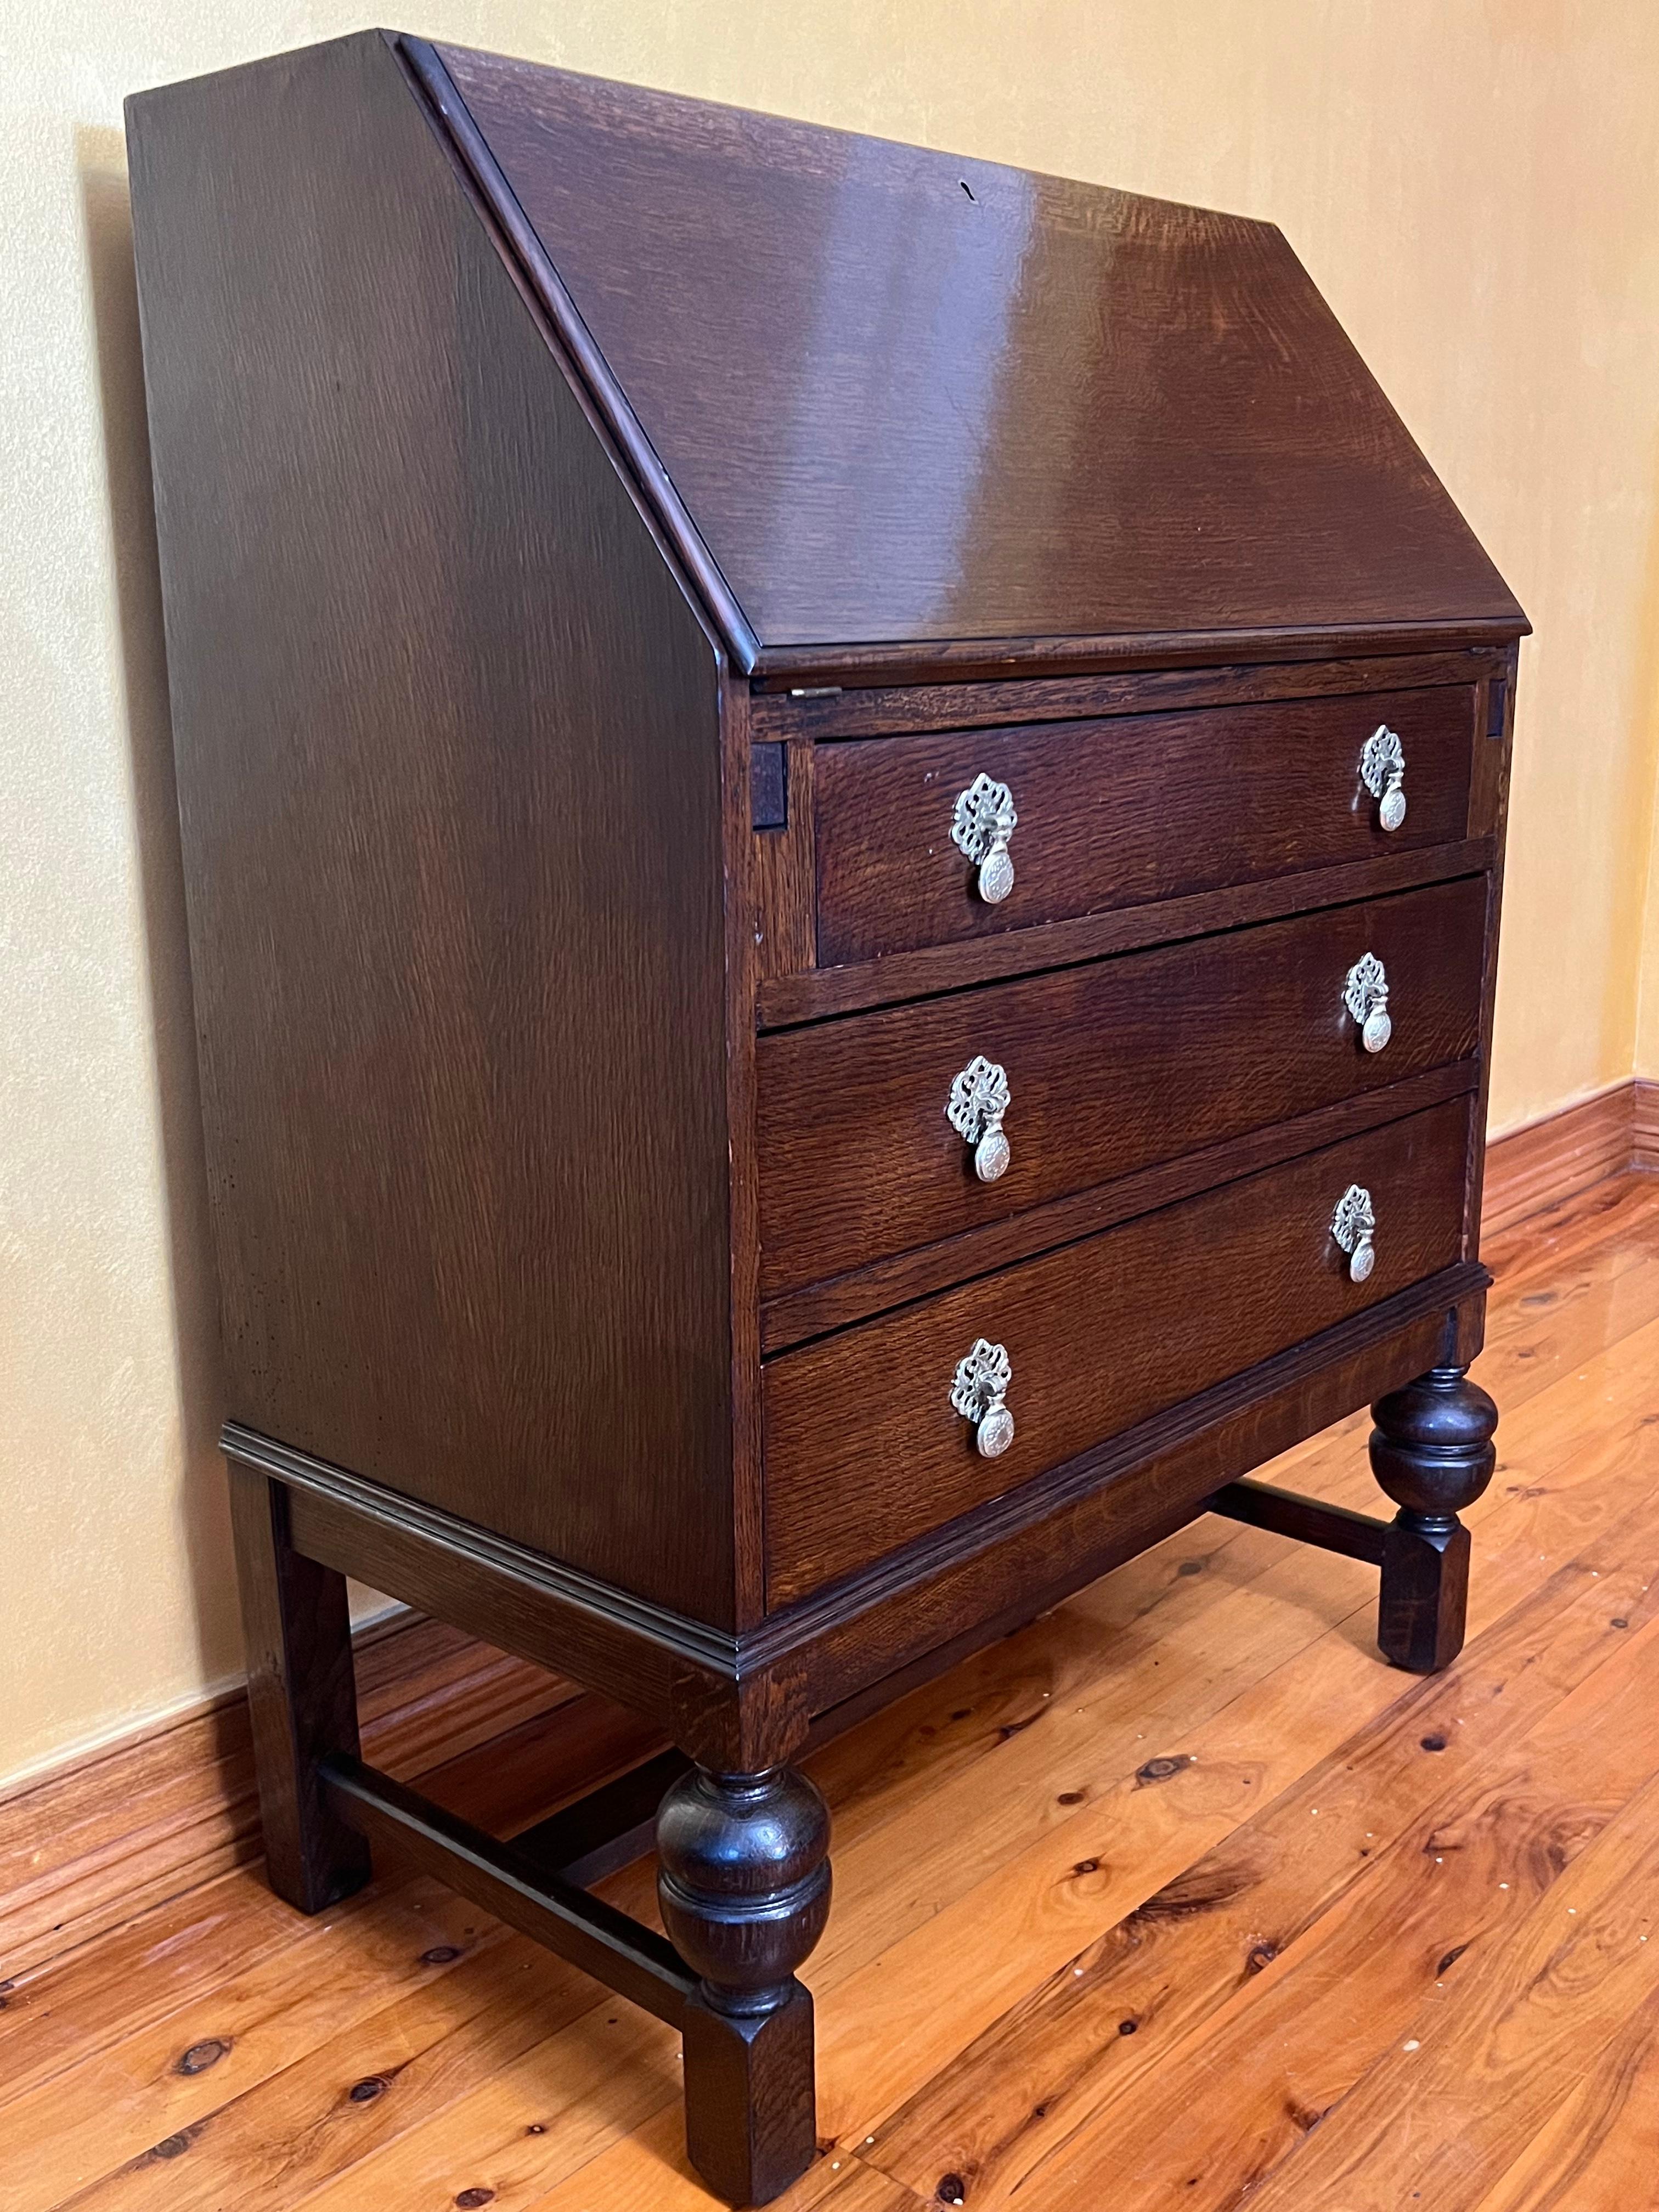 Drop front top with pigeons holes and small drawer, leather insert, three large drawers on bottom, brass fittings. there is not key to top. 

circa: 1920s

Material: Oak

Country of Origin: English

Measurements: 110cm high, 74cm length,